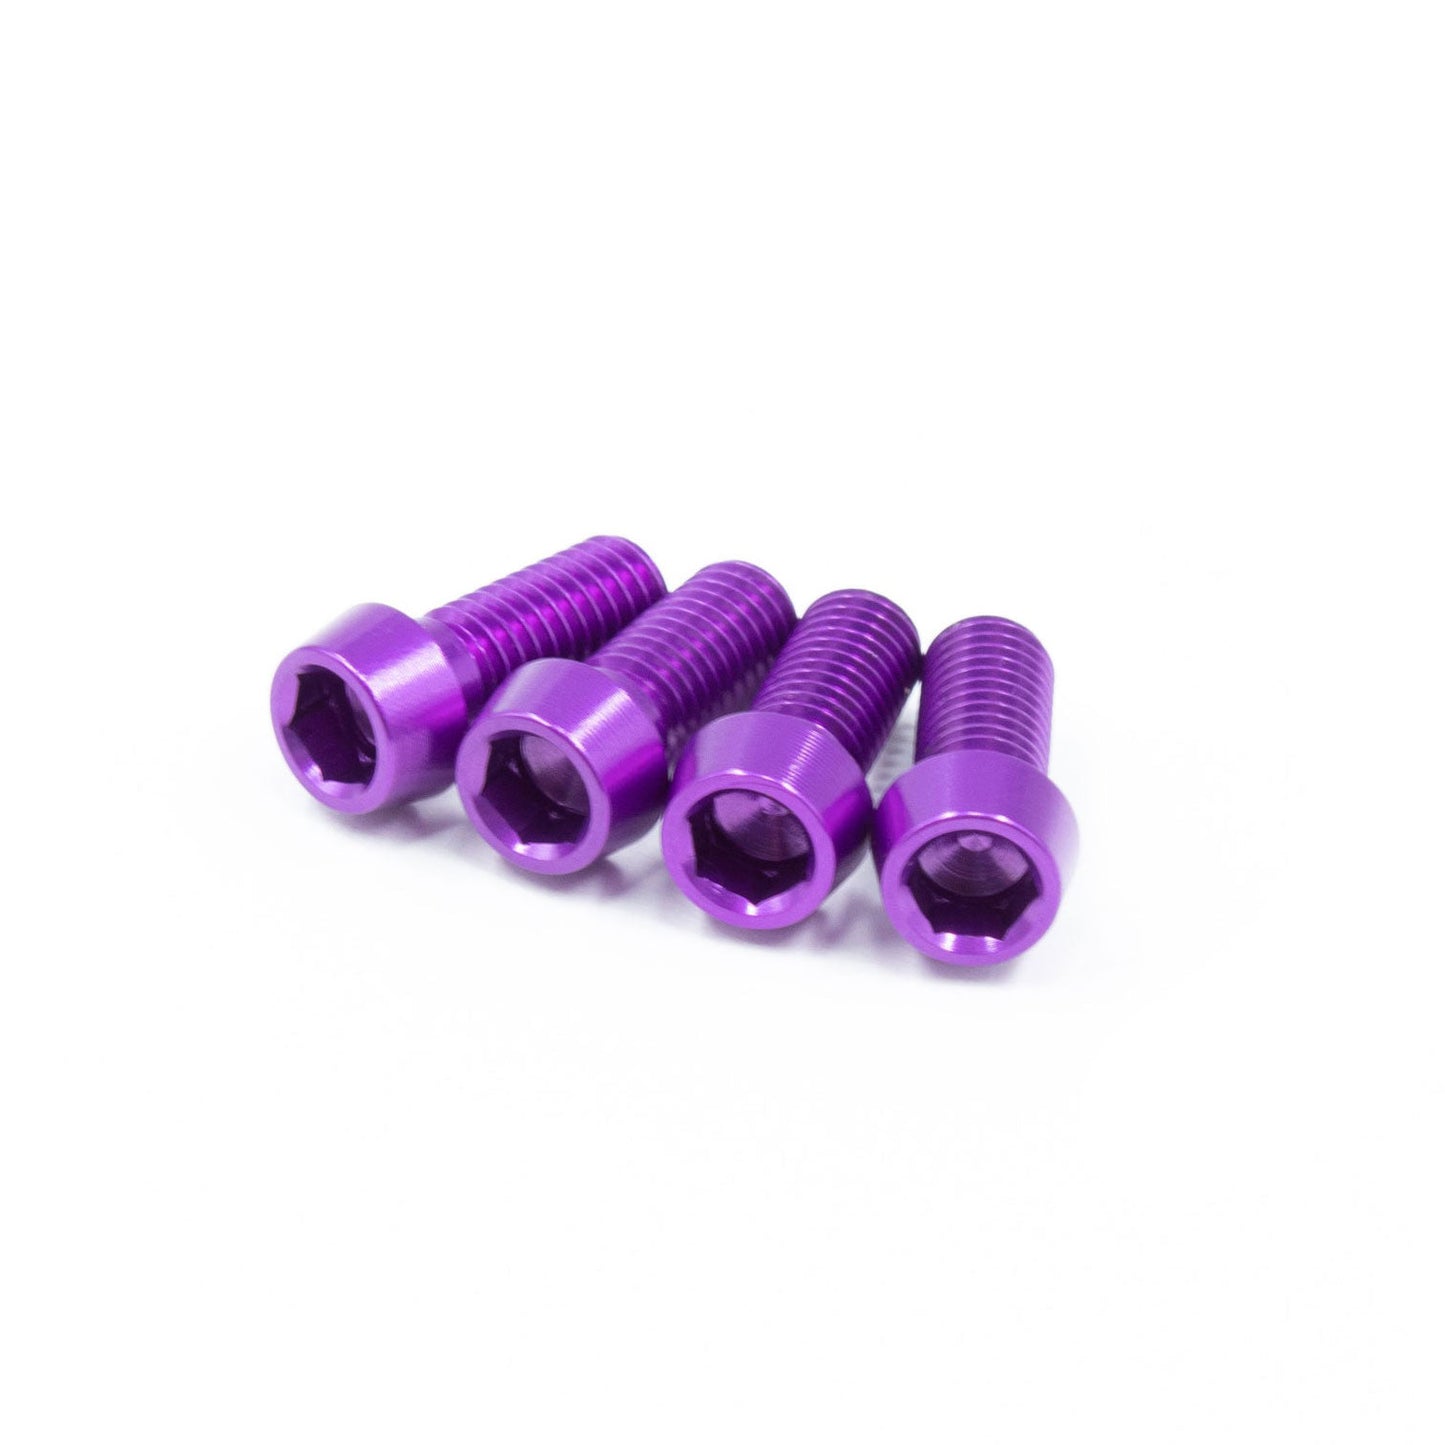 Purple, ultra lightweight set of bolts for bicycle bottle cages